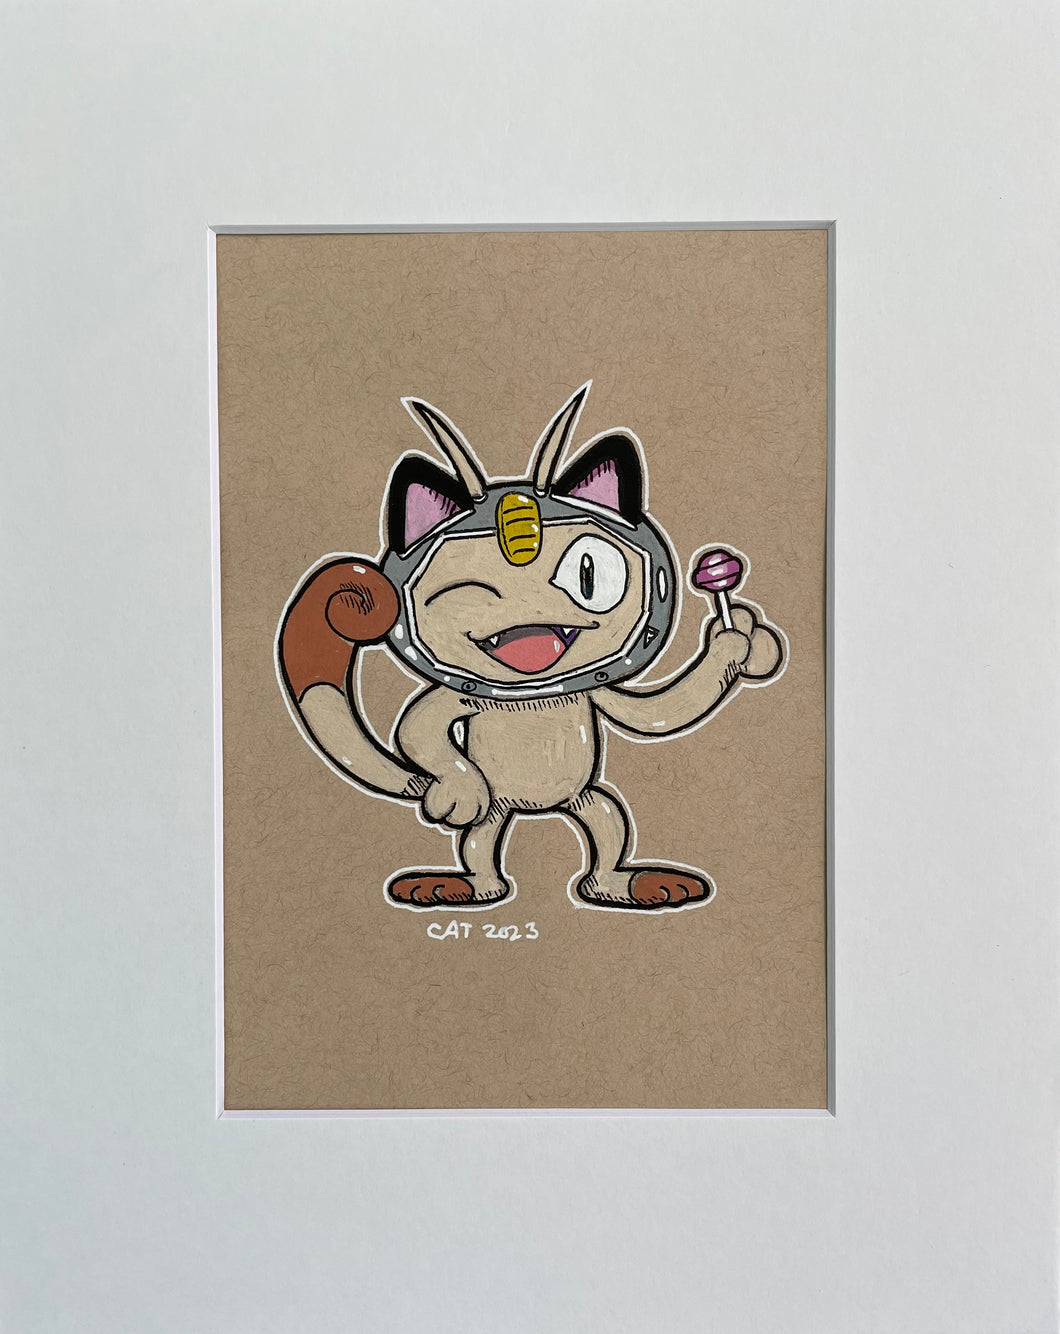 Space Meowth